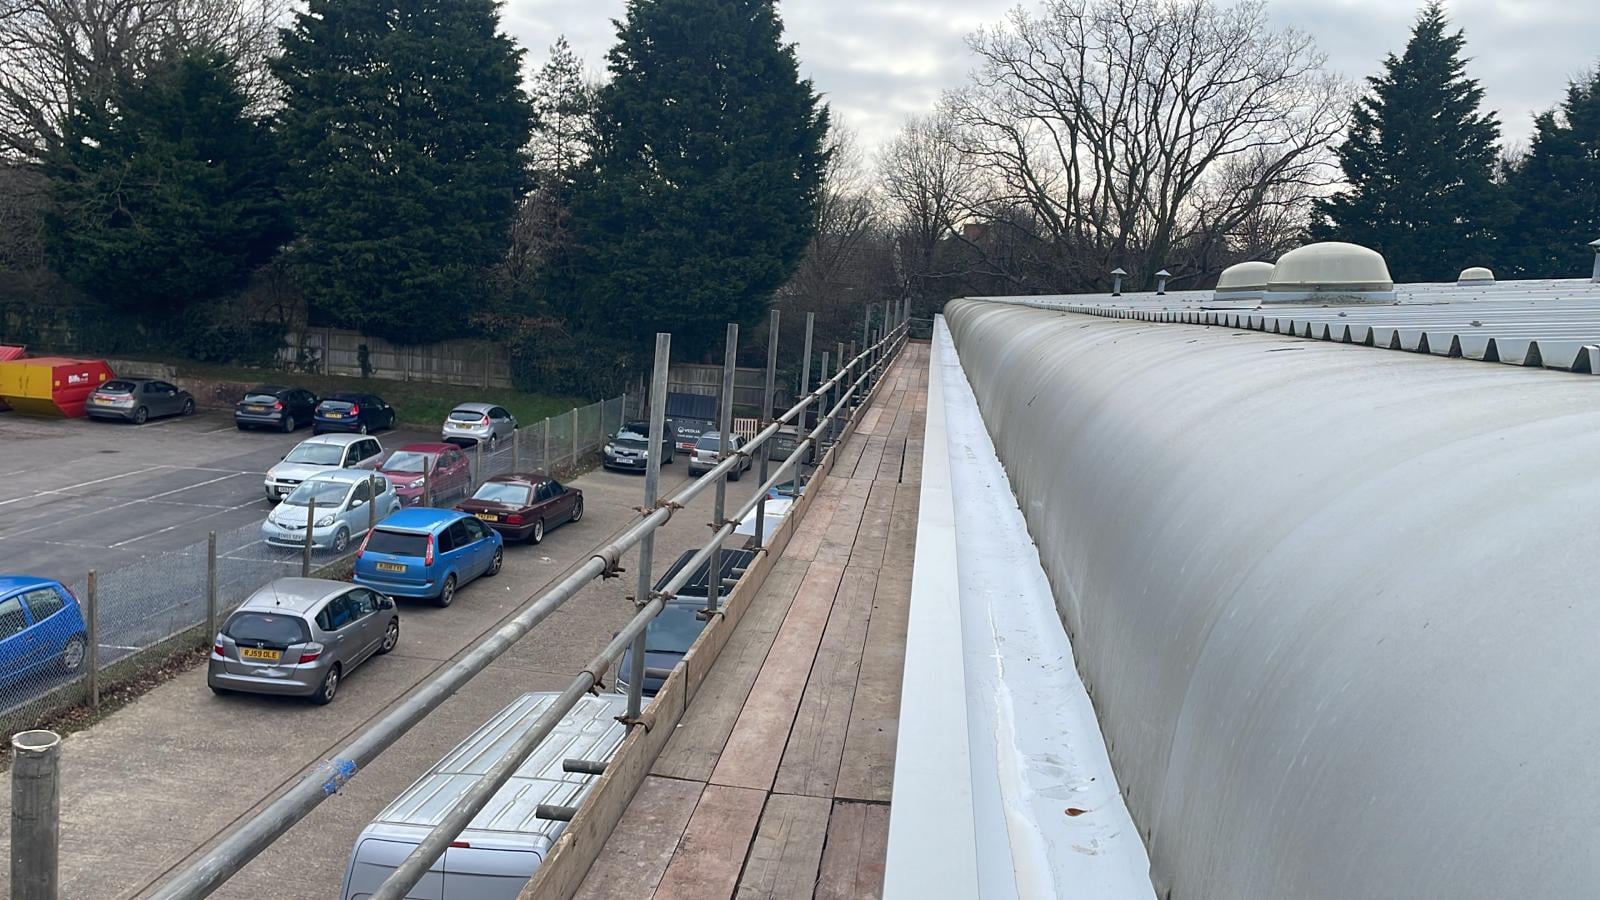 Gutter replacement for business in Burgess Hill, West Sussex